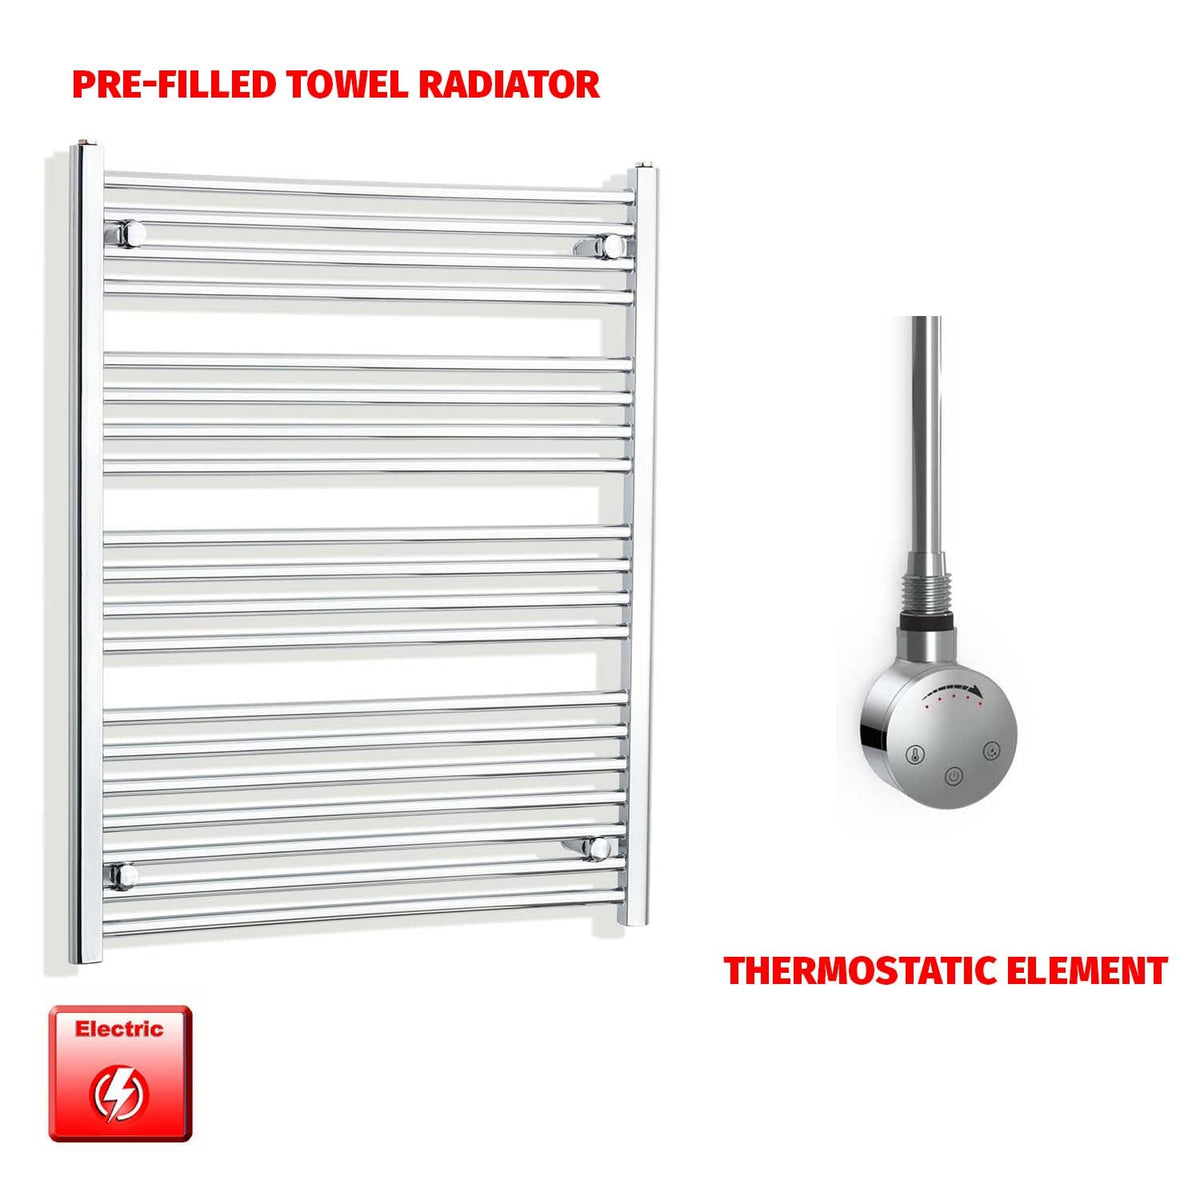 1000 x 800 Pre-Filled Electric Heated Towel Radiator Straight Chrome SMR Thermostatic element no timer